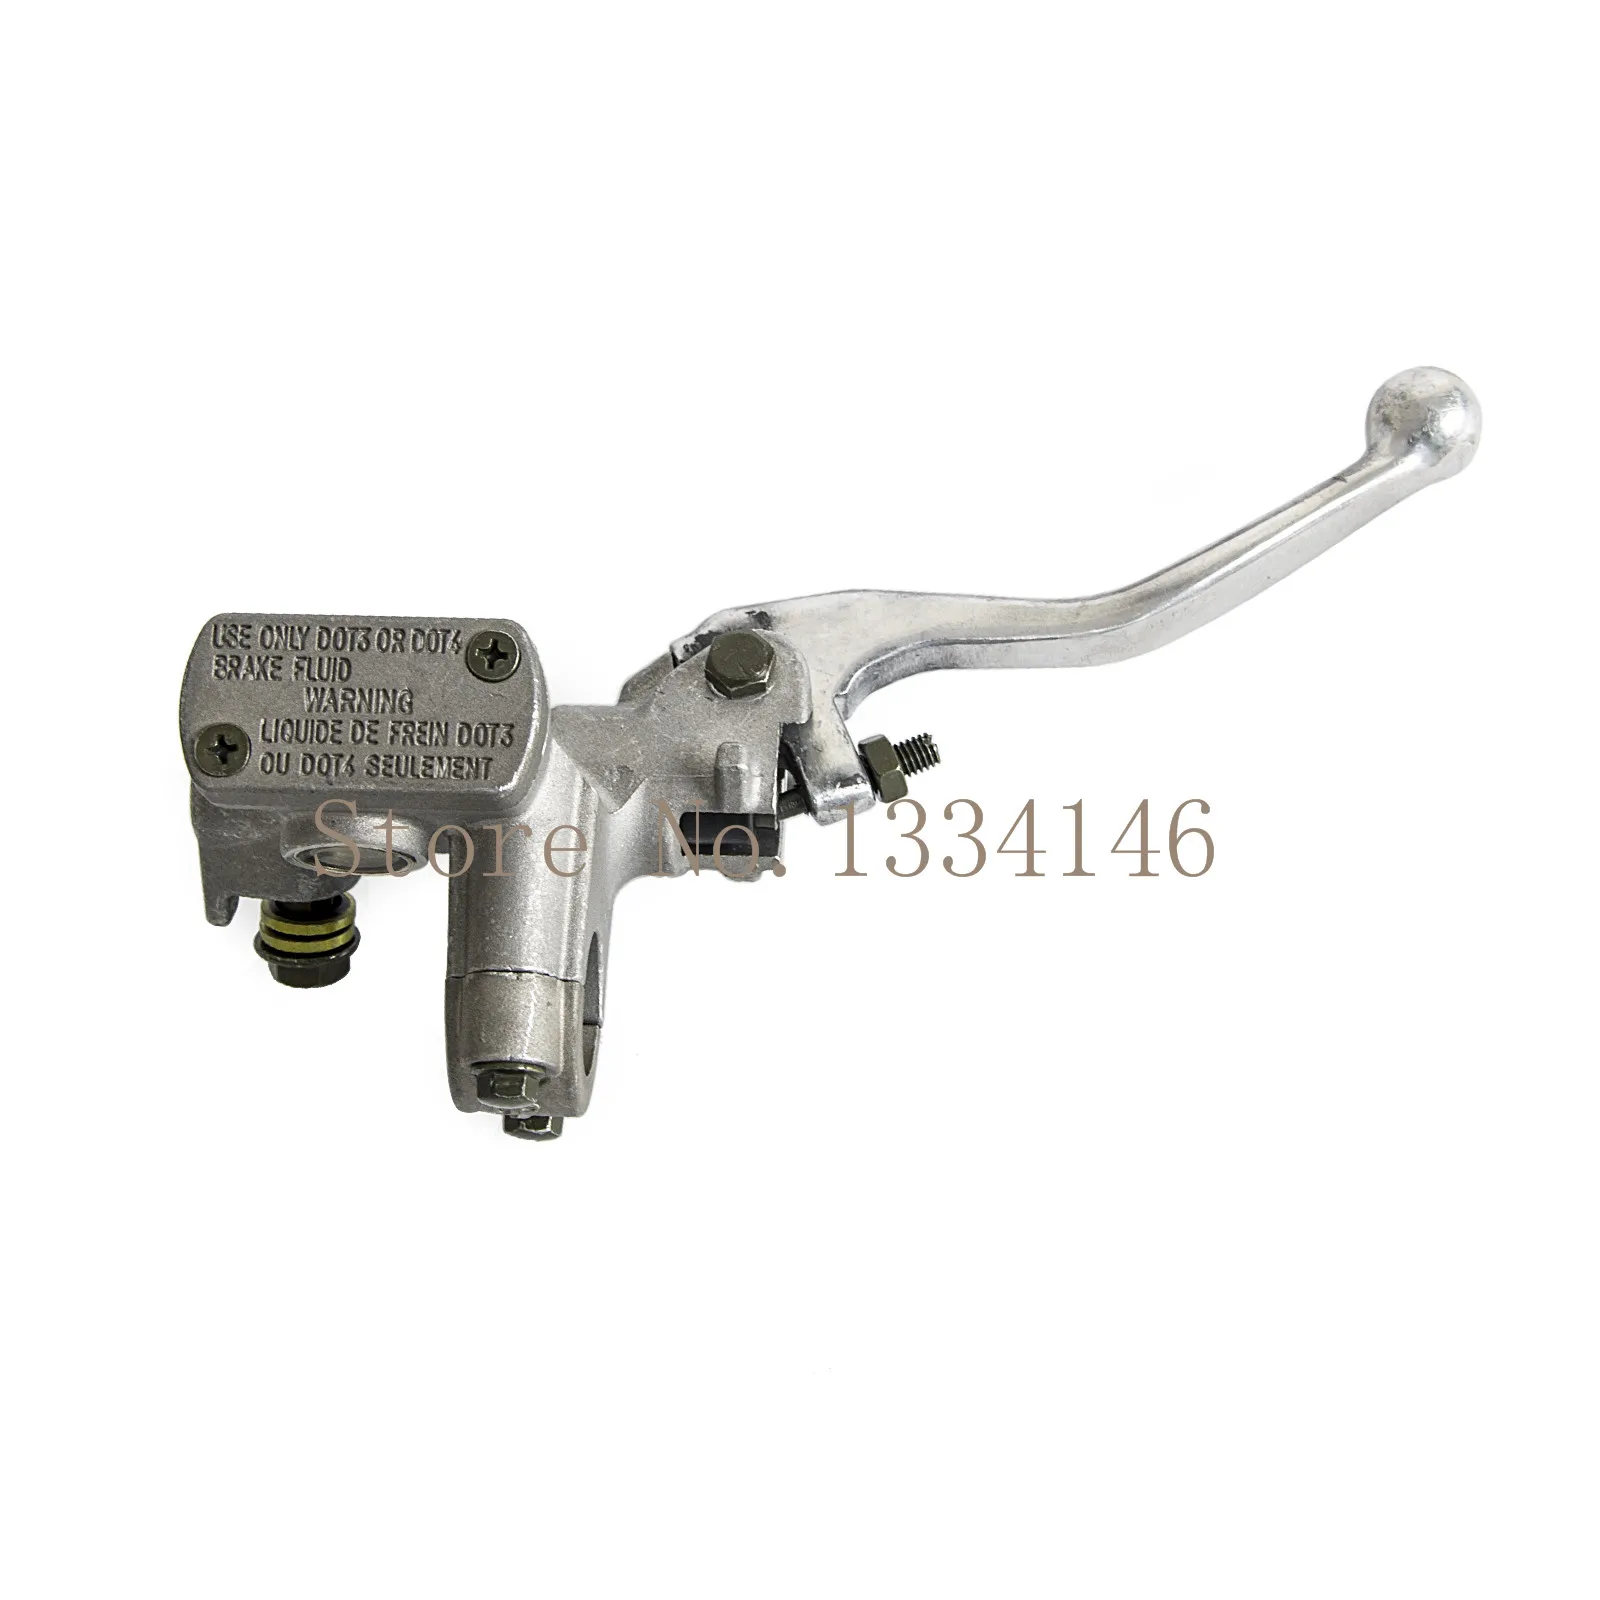 7/8 Right Front Brake Master Cylinder Lever Perch for Honda CR125R CR250R CR500R CRF250R CRF250X CRF450R CRF450X XR250R XR400R XR650R 